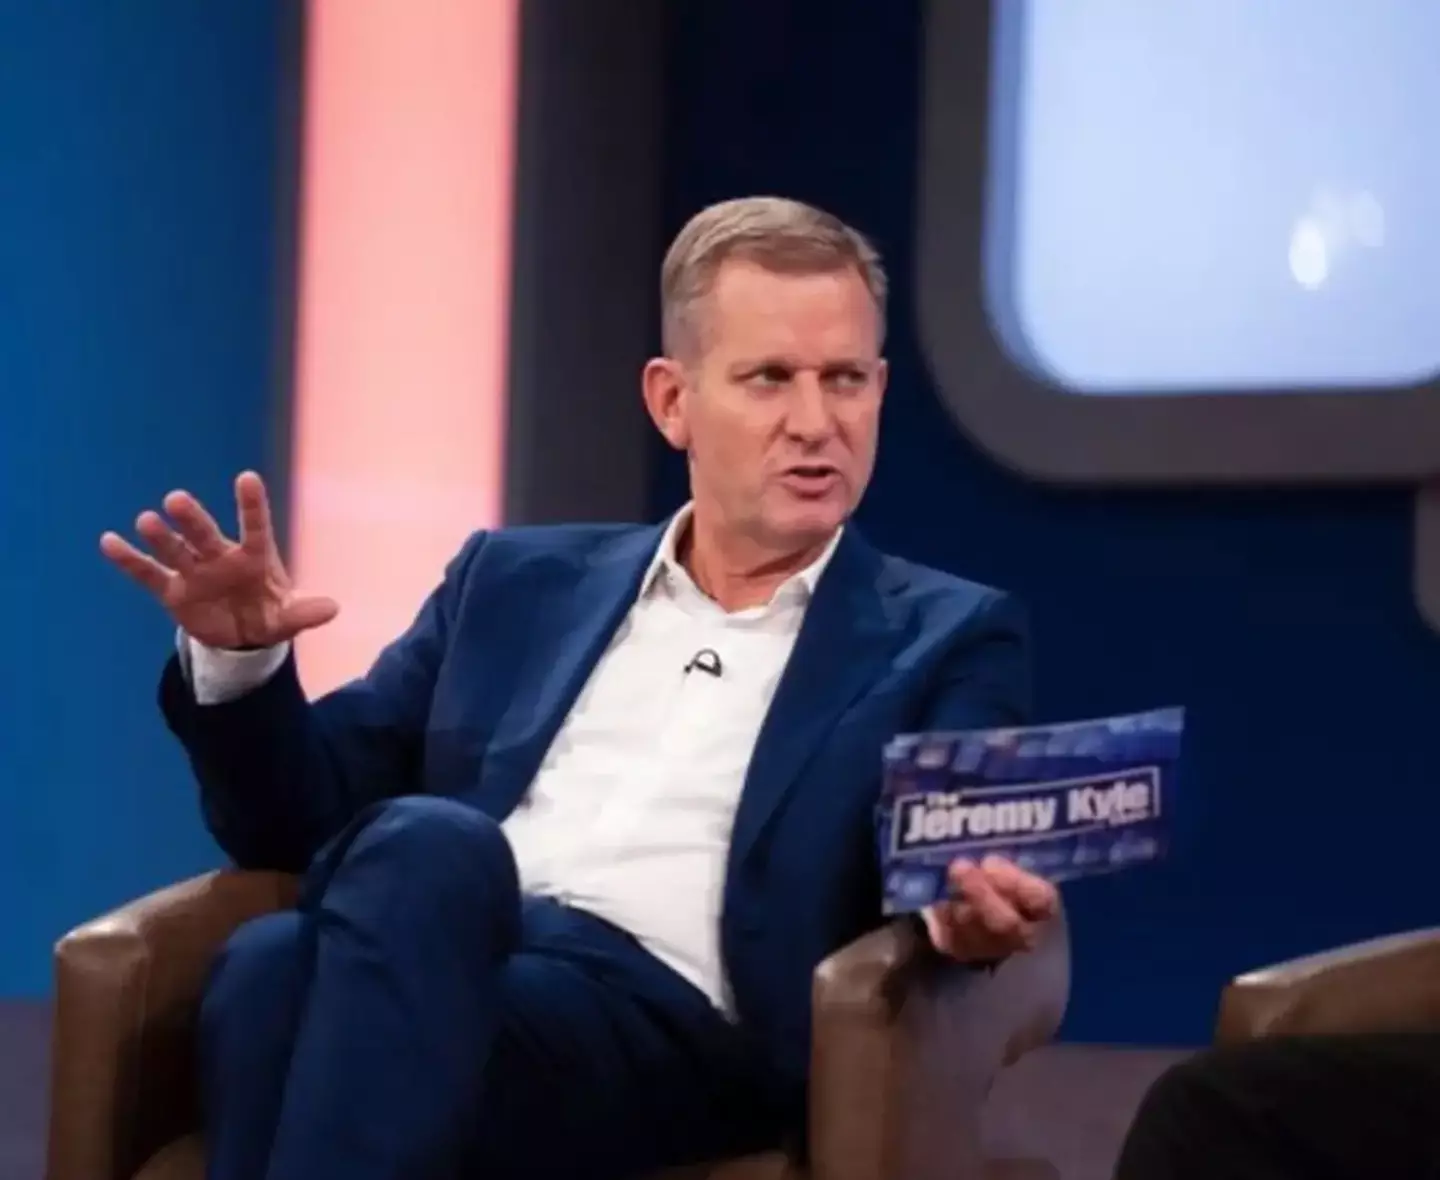 The Jeremy Kyle show was cancelled in 2019.